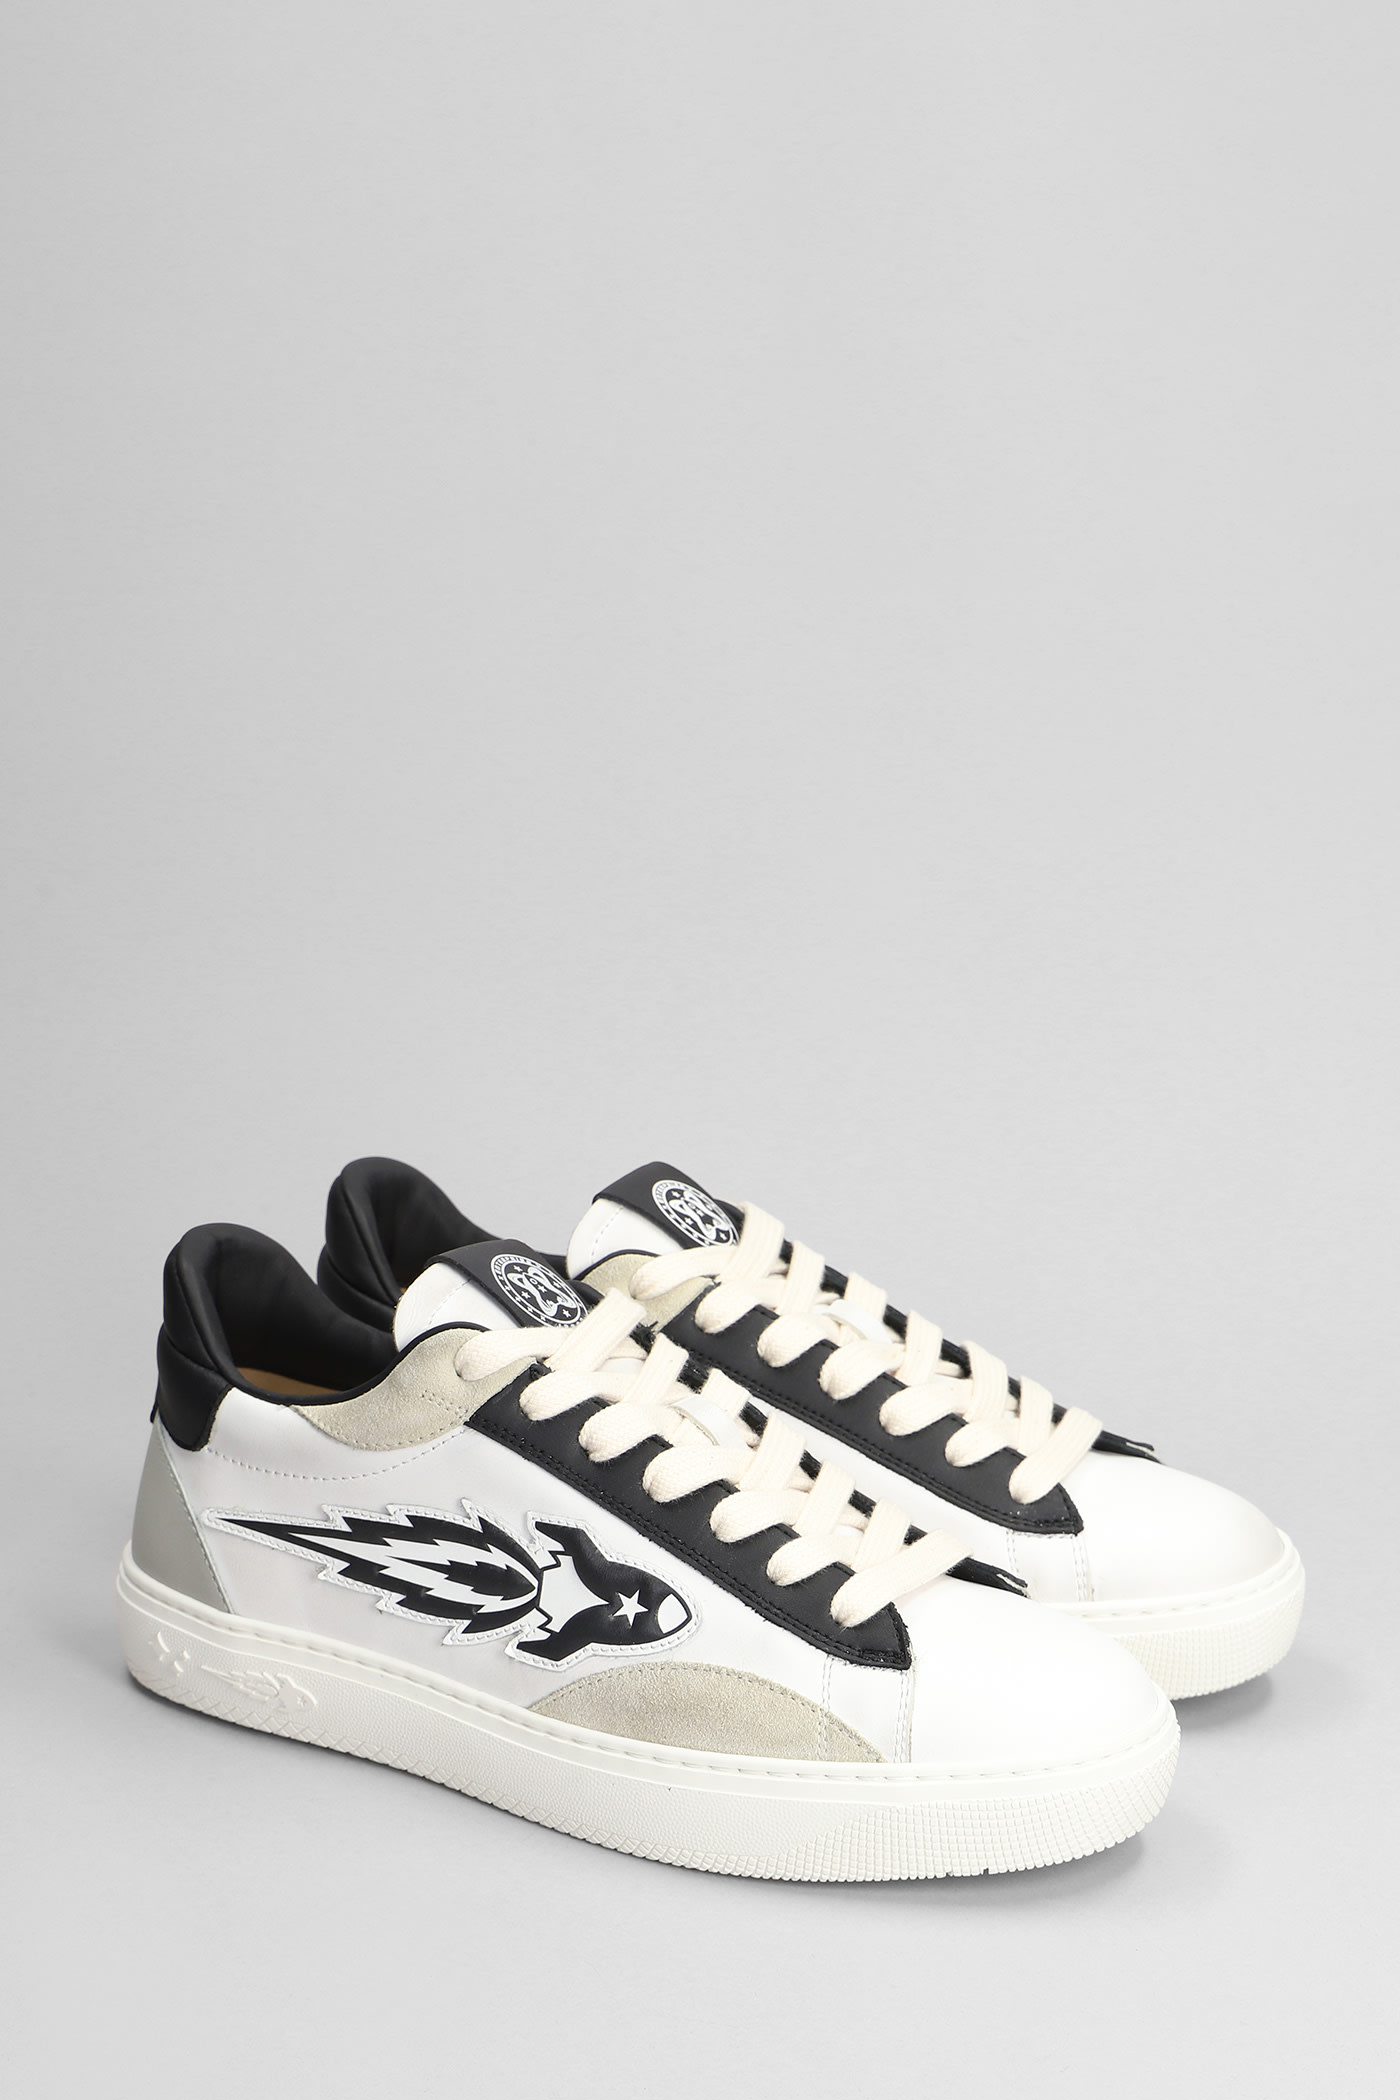 Shop Enterprise Japan Sneakers In White Suede And Leather